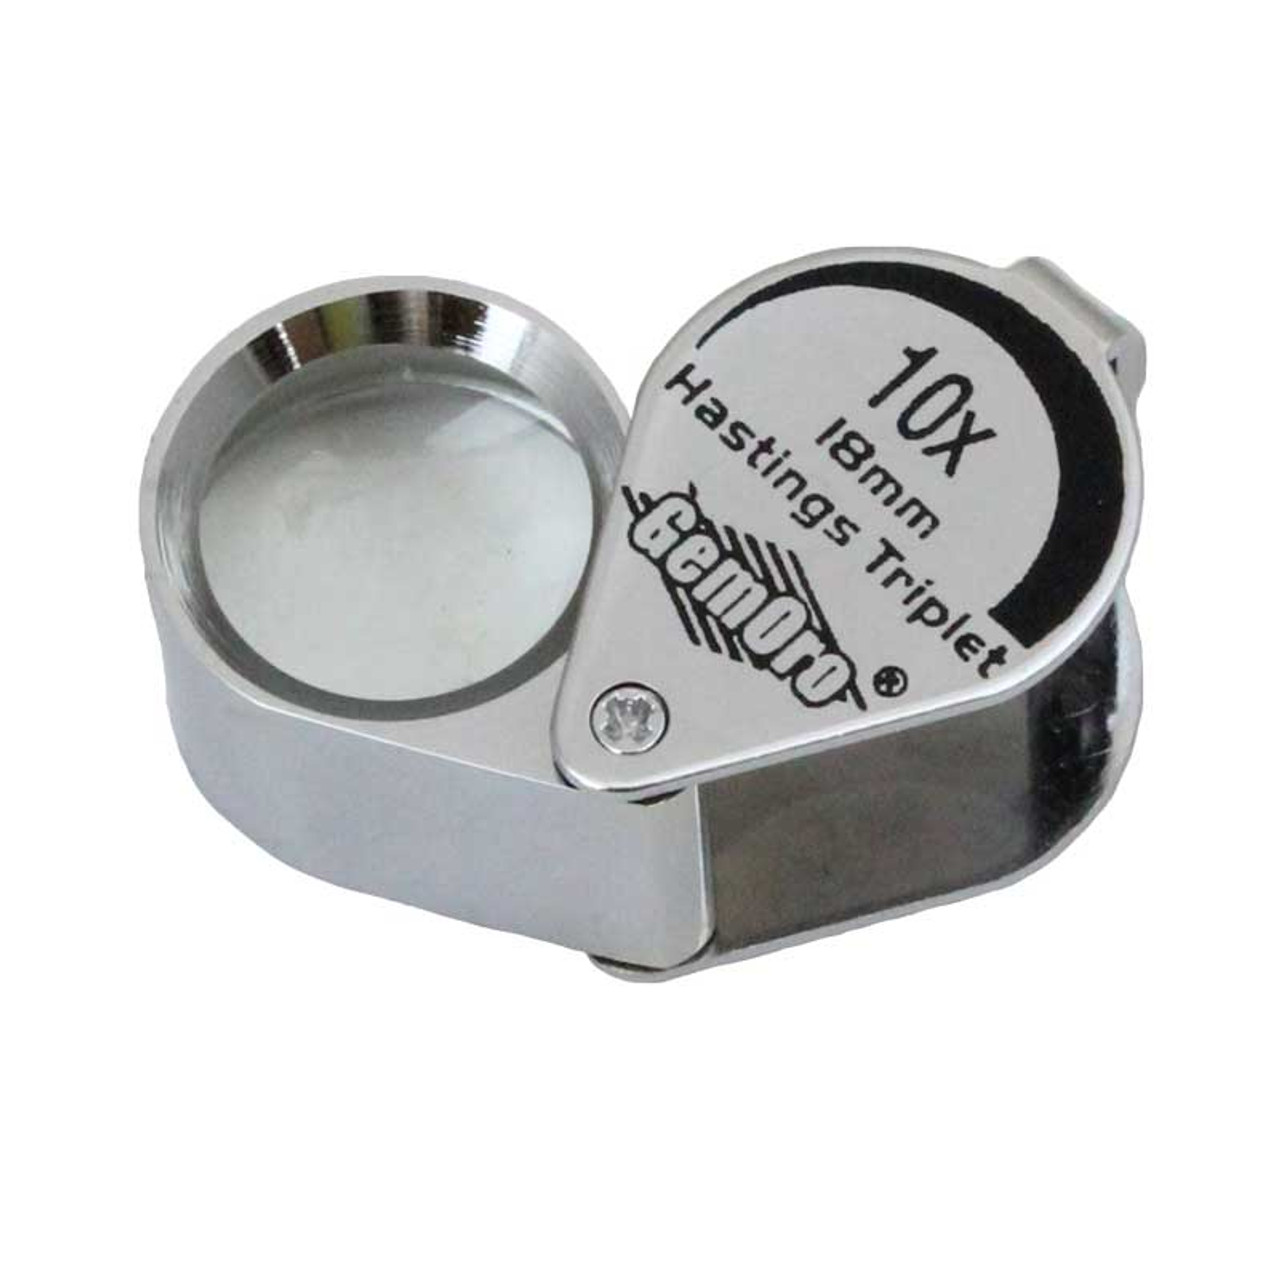 Jewelry and Watch Loupe Precision Triplet Diamond 18mm 10x Rubber Grip